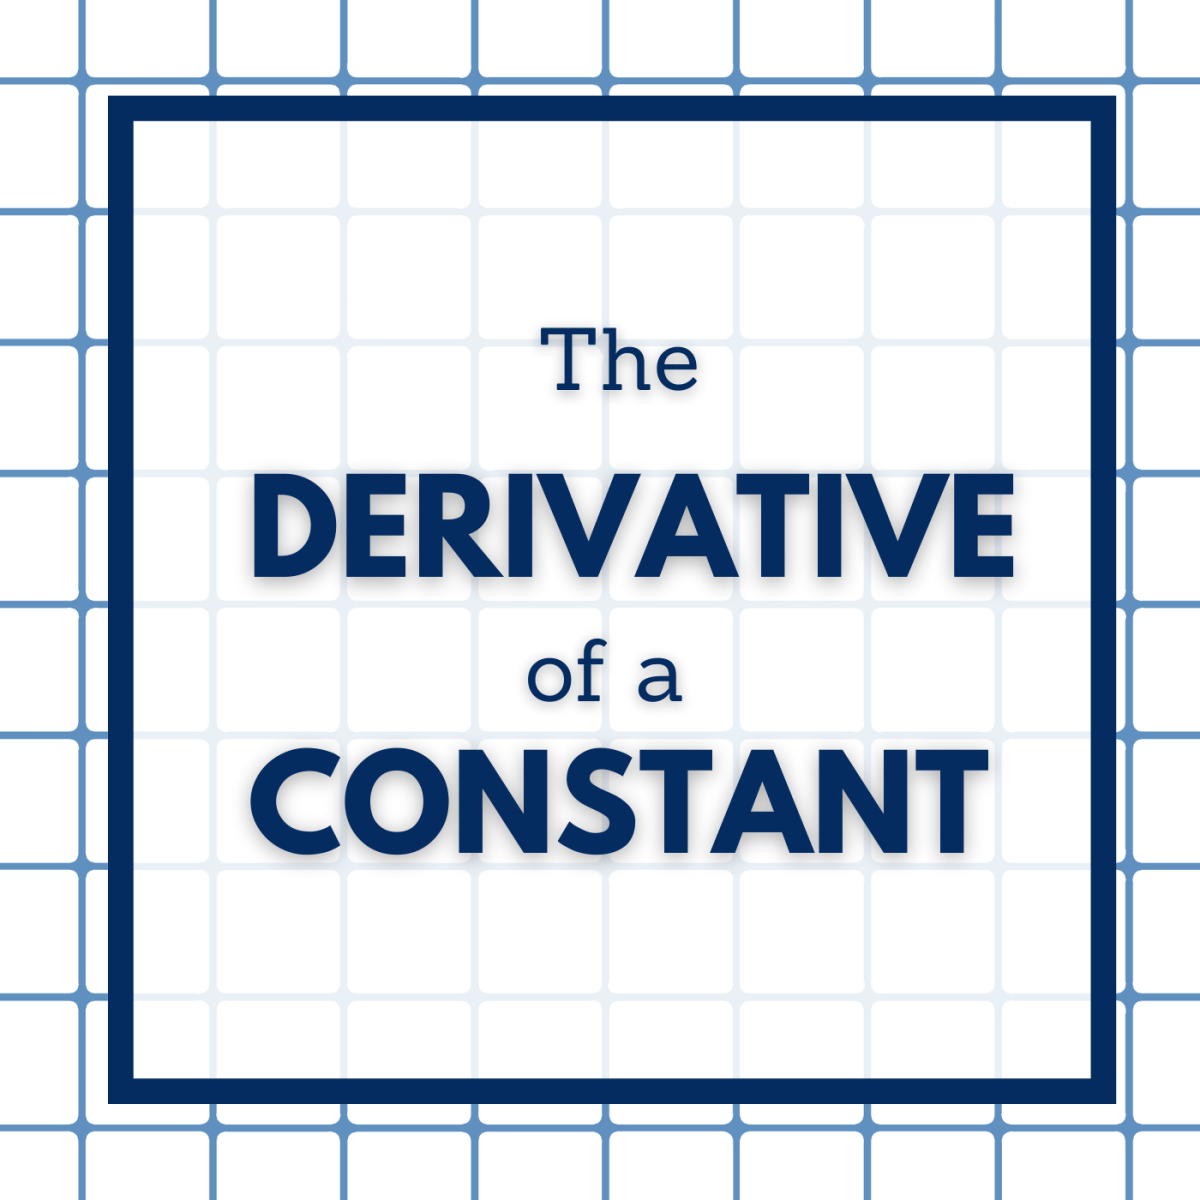 What is the derivative of a constant?